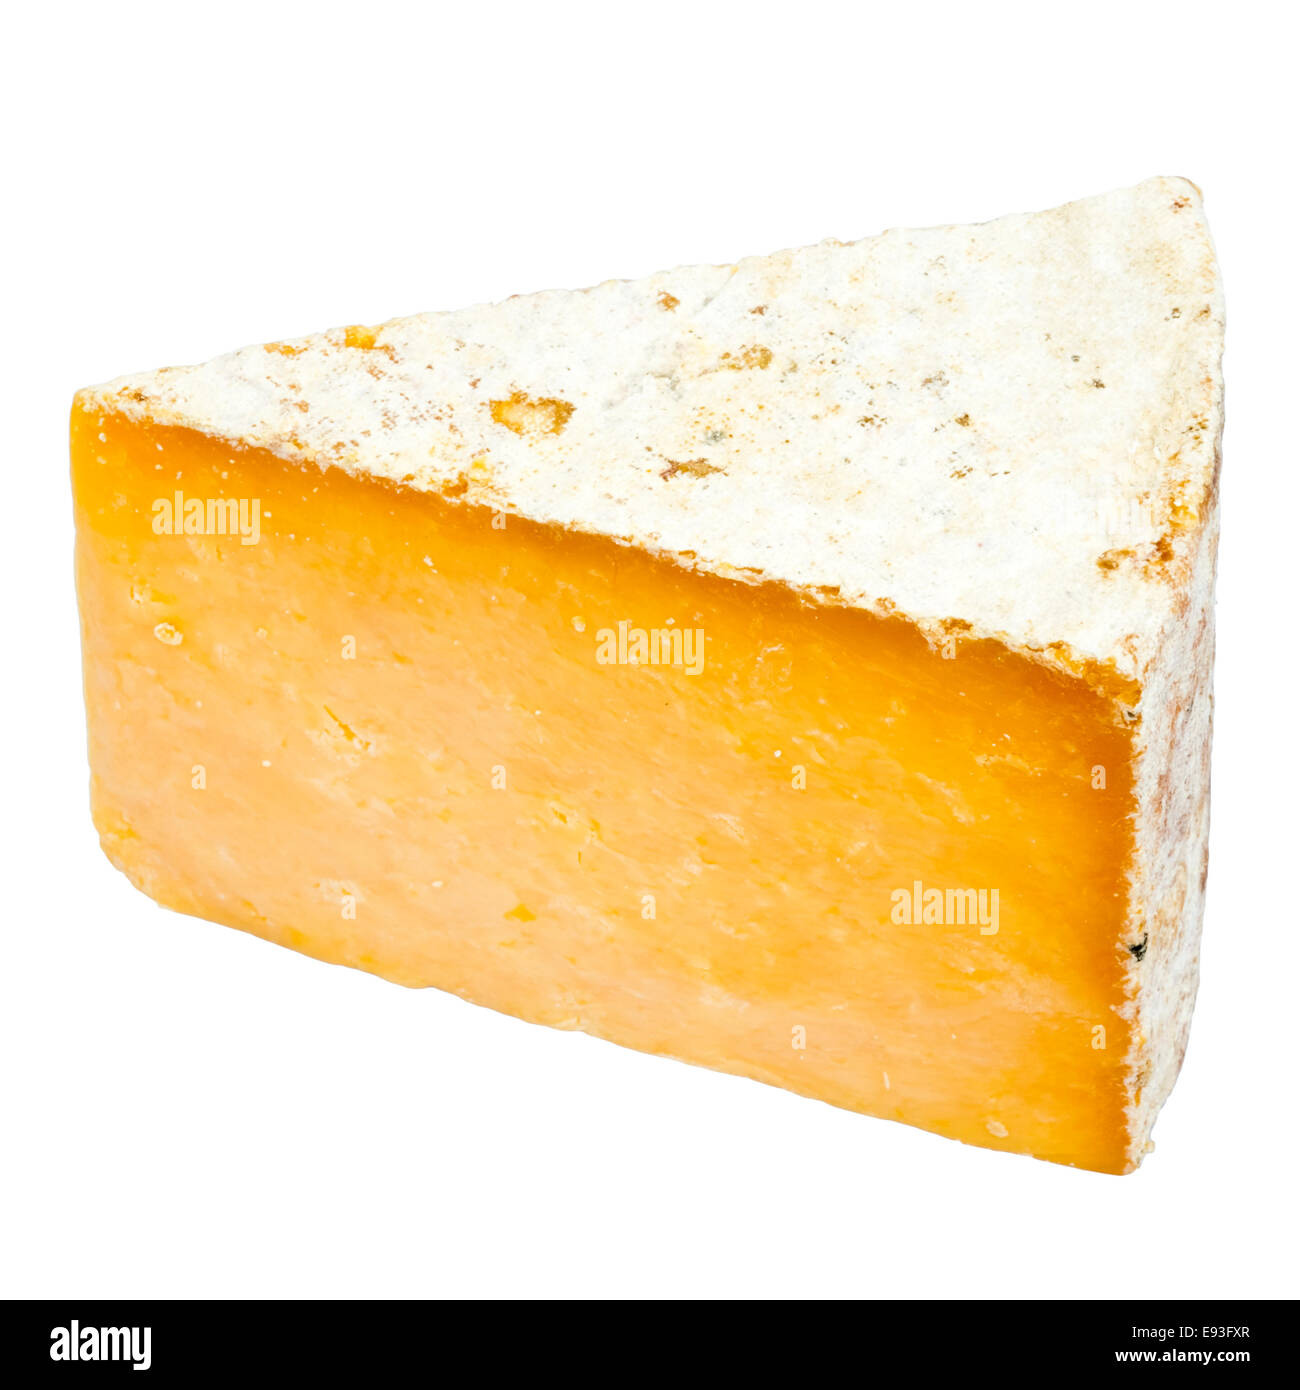 Wedge of Red Leicester cheese cut out or isolated against a white background. Stock Photo